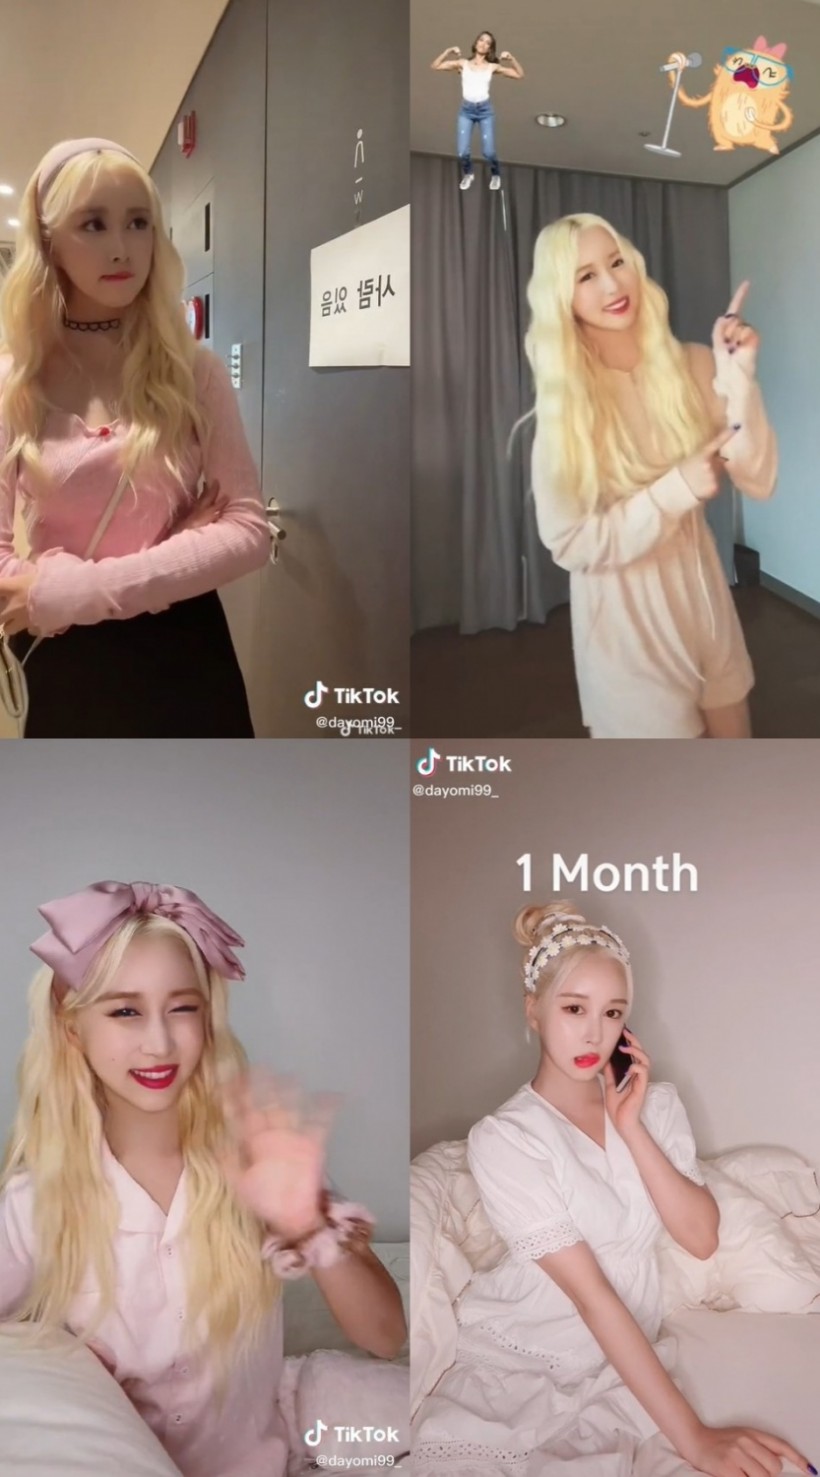 WJSN Dayoung on her personal TikTok Channel